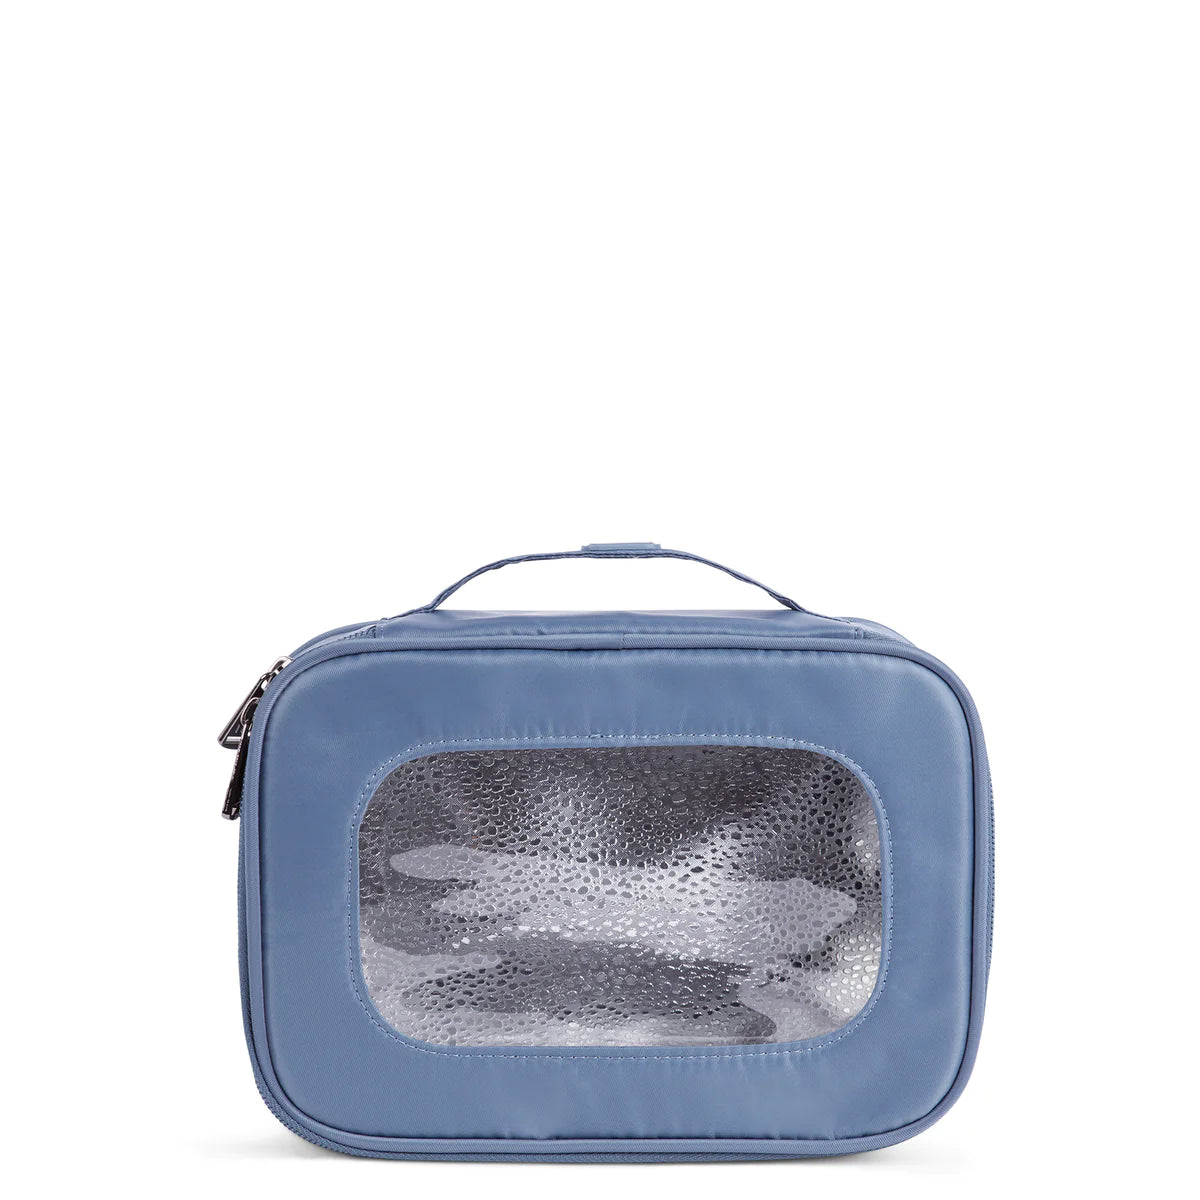 LUG Bento Insulated Container in Slate Blue